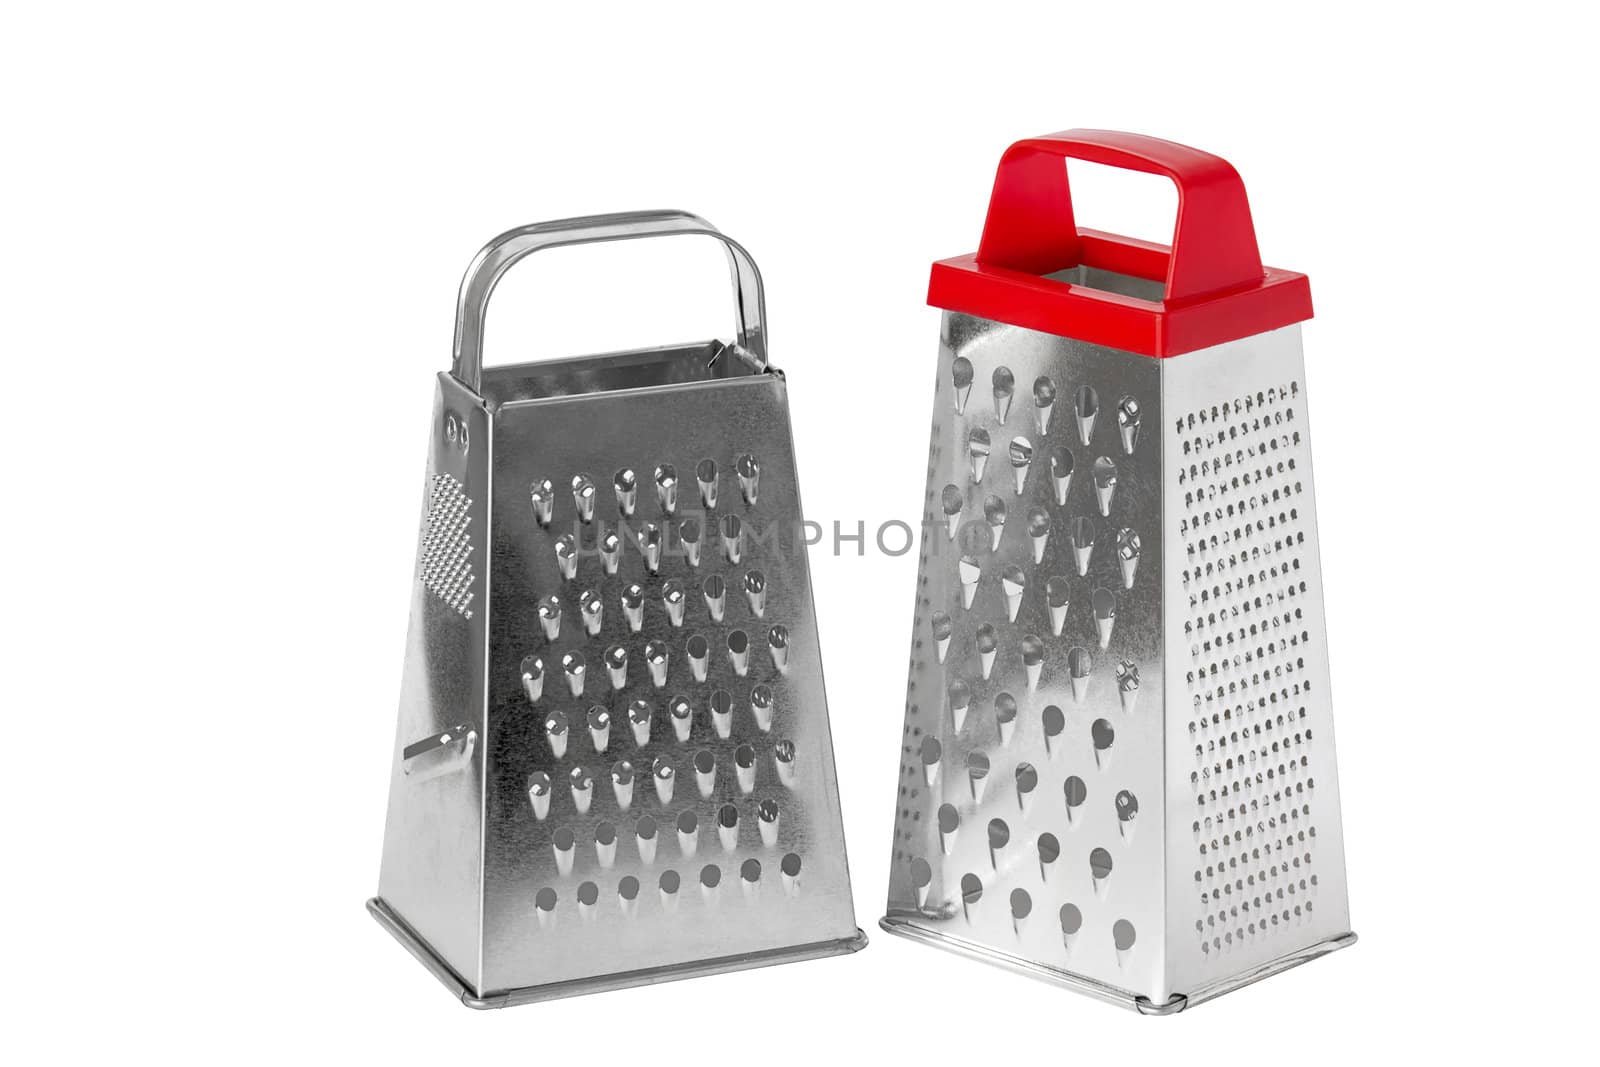 Metal grater by zhannaprokopeva